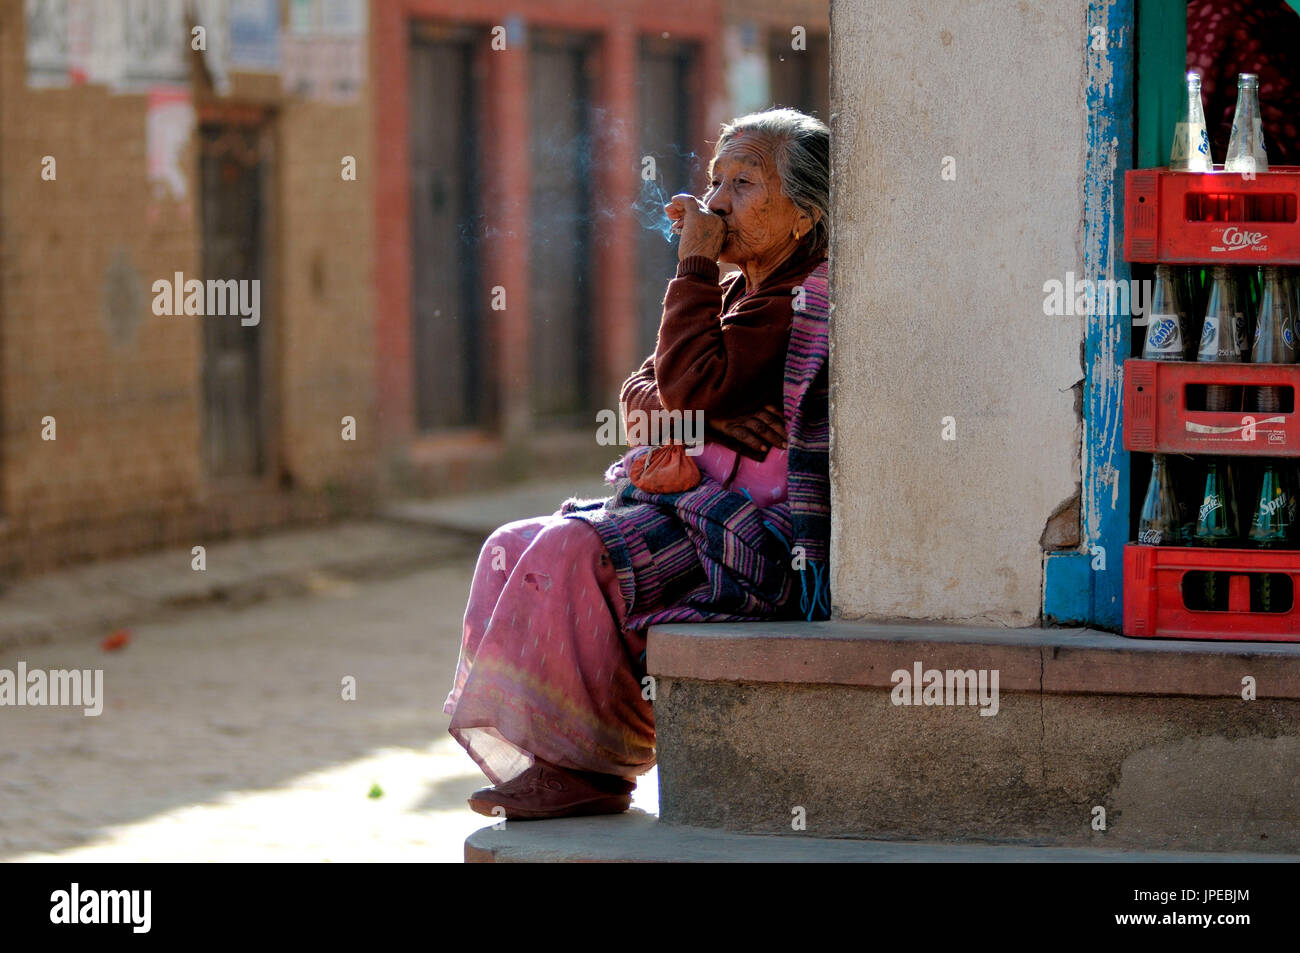 A woman relaxes in the sun, smoking his cigarette and observing the life around her. Panauti, Nepal Stock Photo